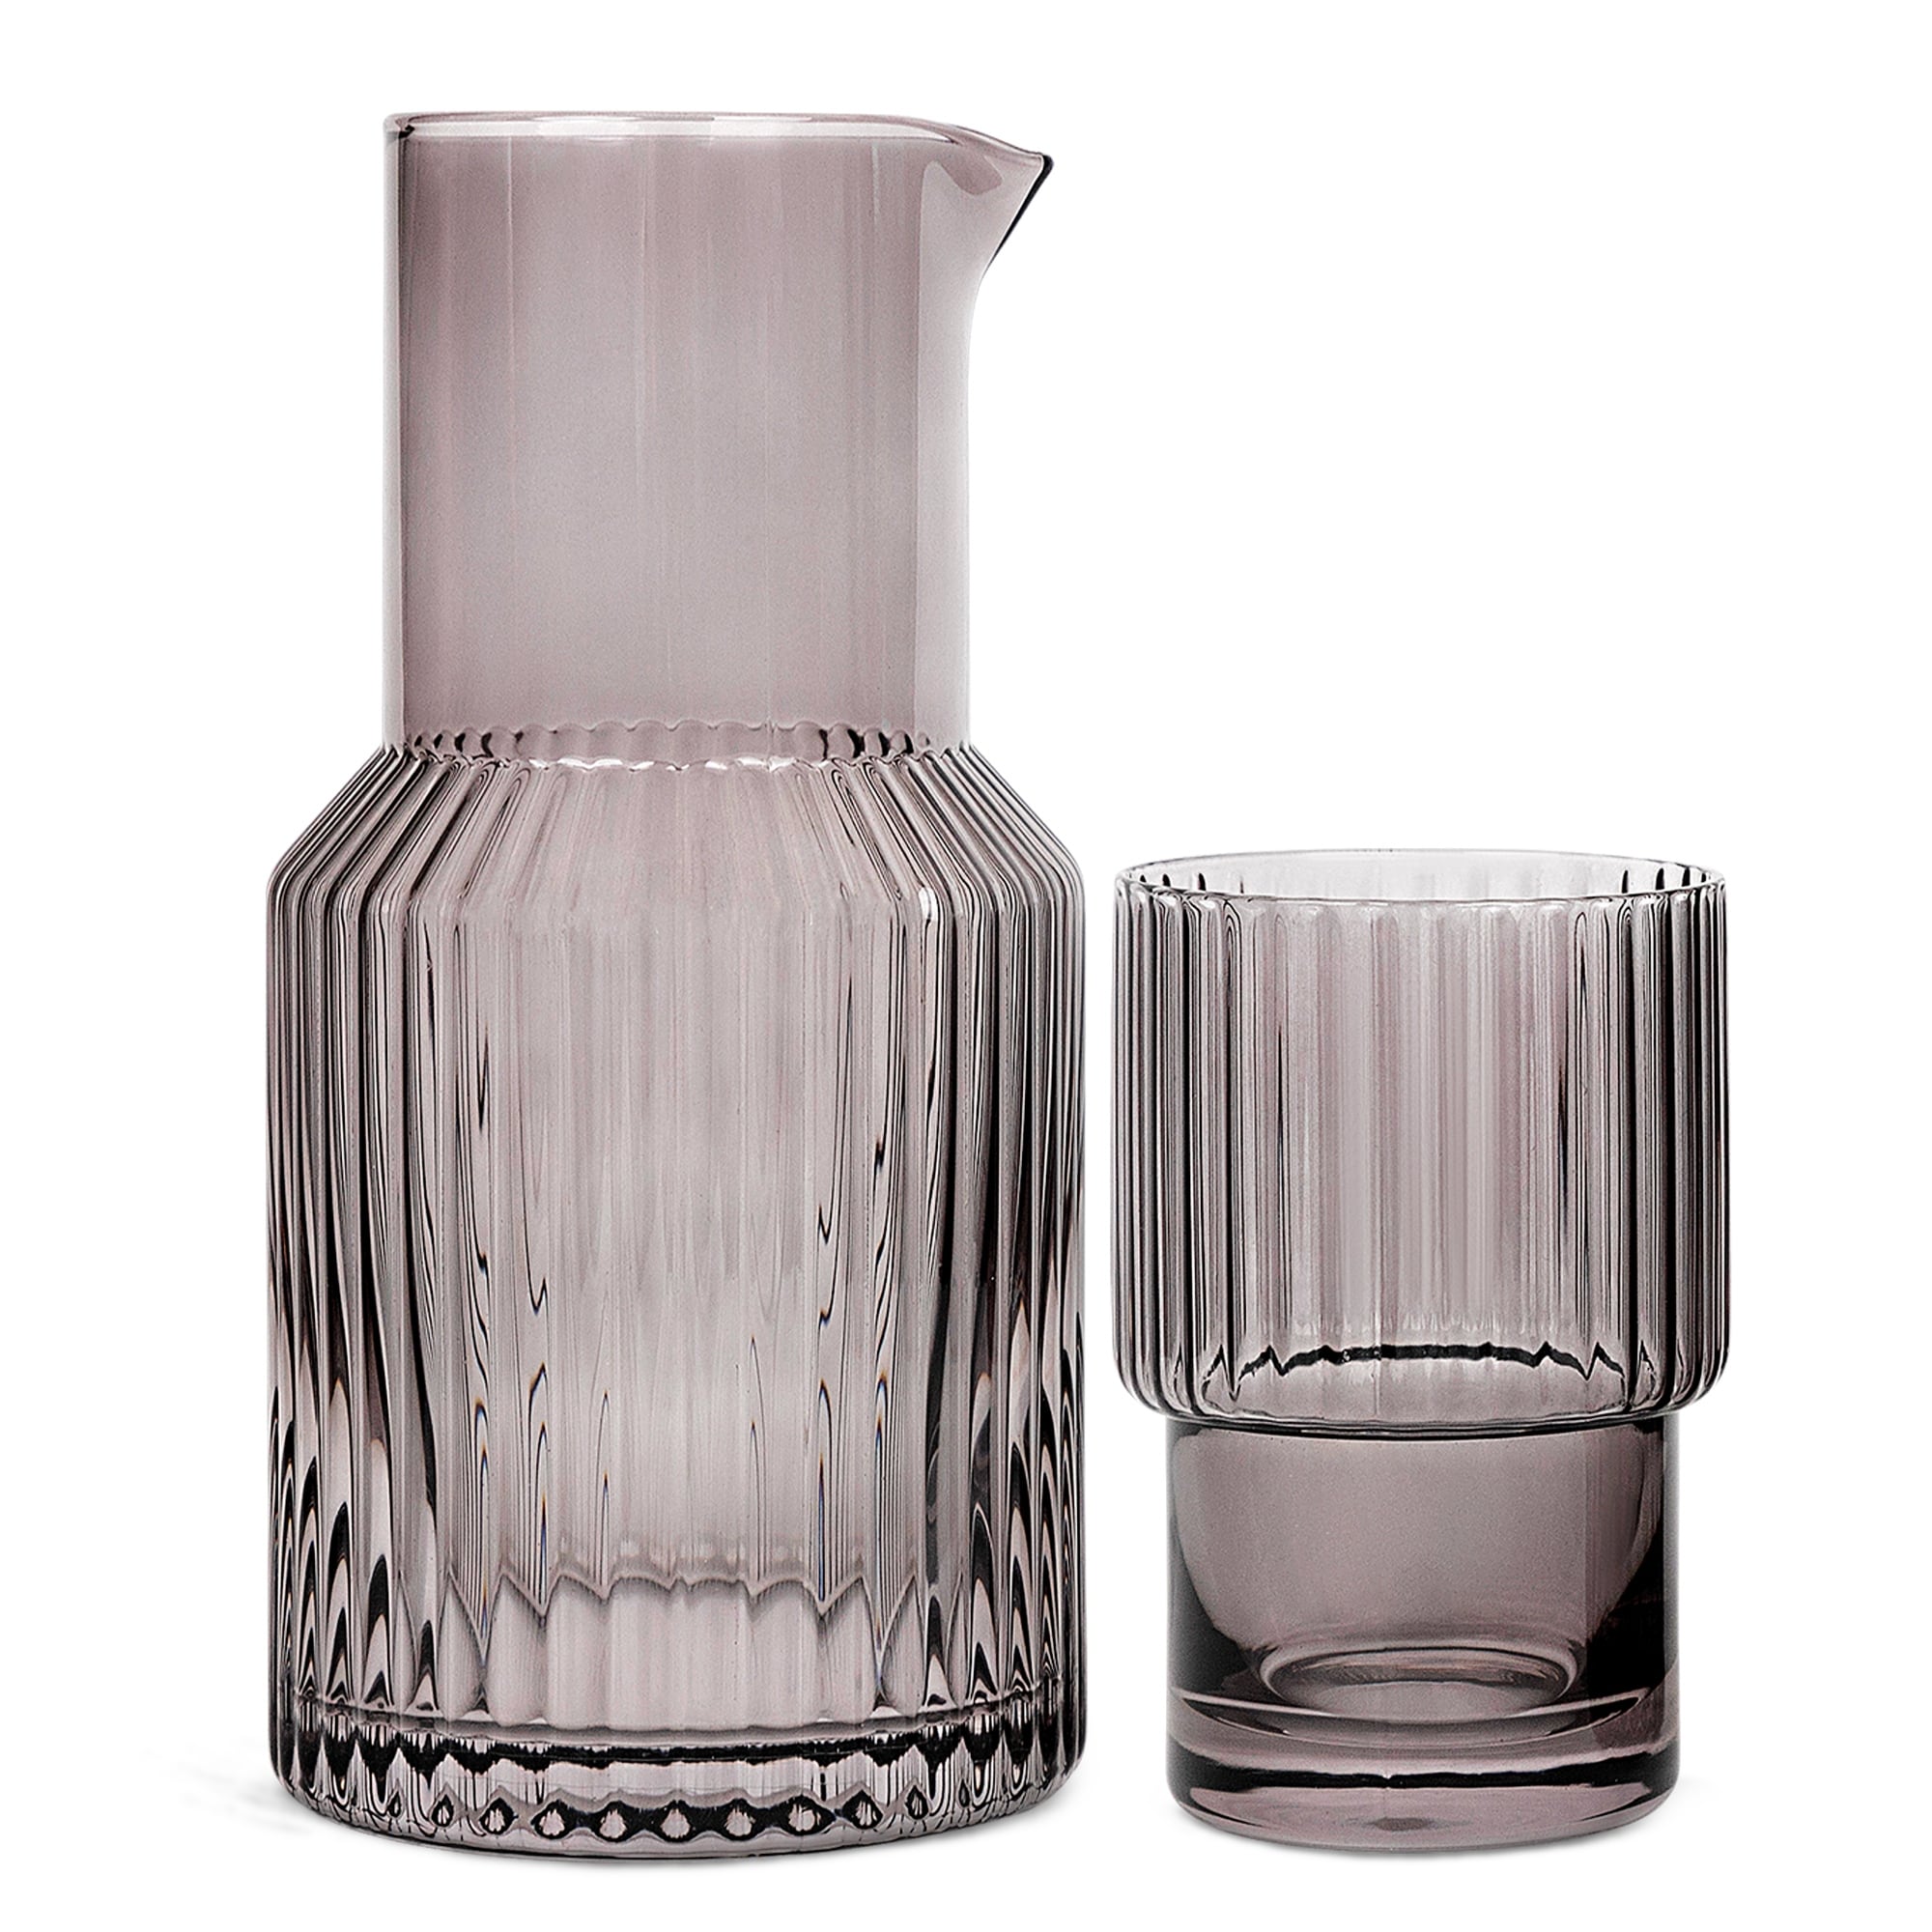 https://ak1.ostkcdn.com/images/products/is/images/direct/9b2ca917c675812138c2a364852025bfb6f42a11/Elle-Decor-Carafe-Set-Night-Water-Ribbed-Pitcher-and-Cup.jpg